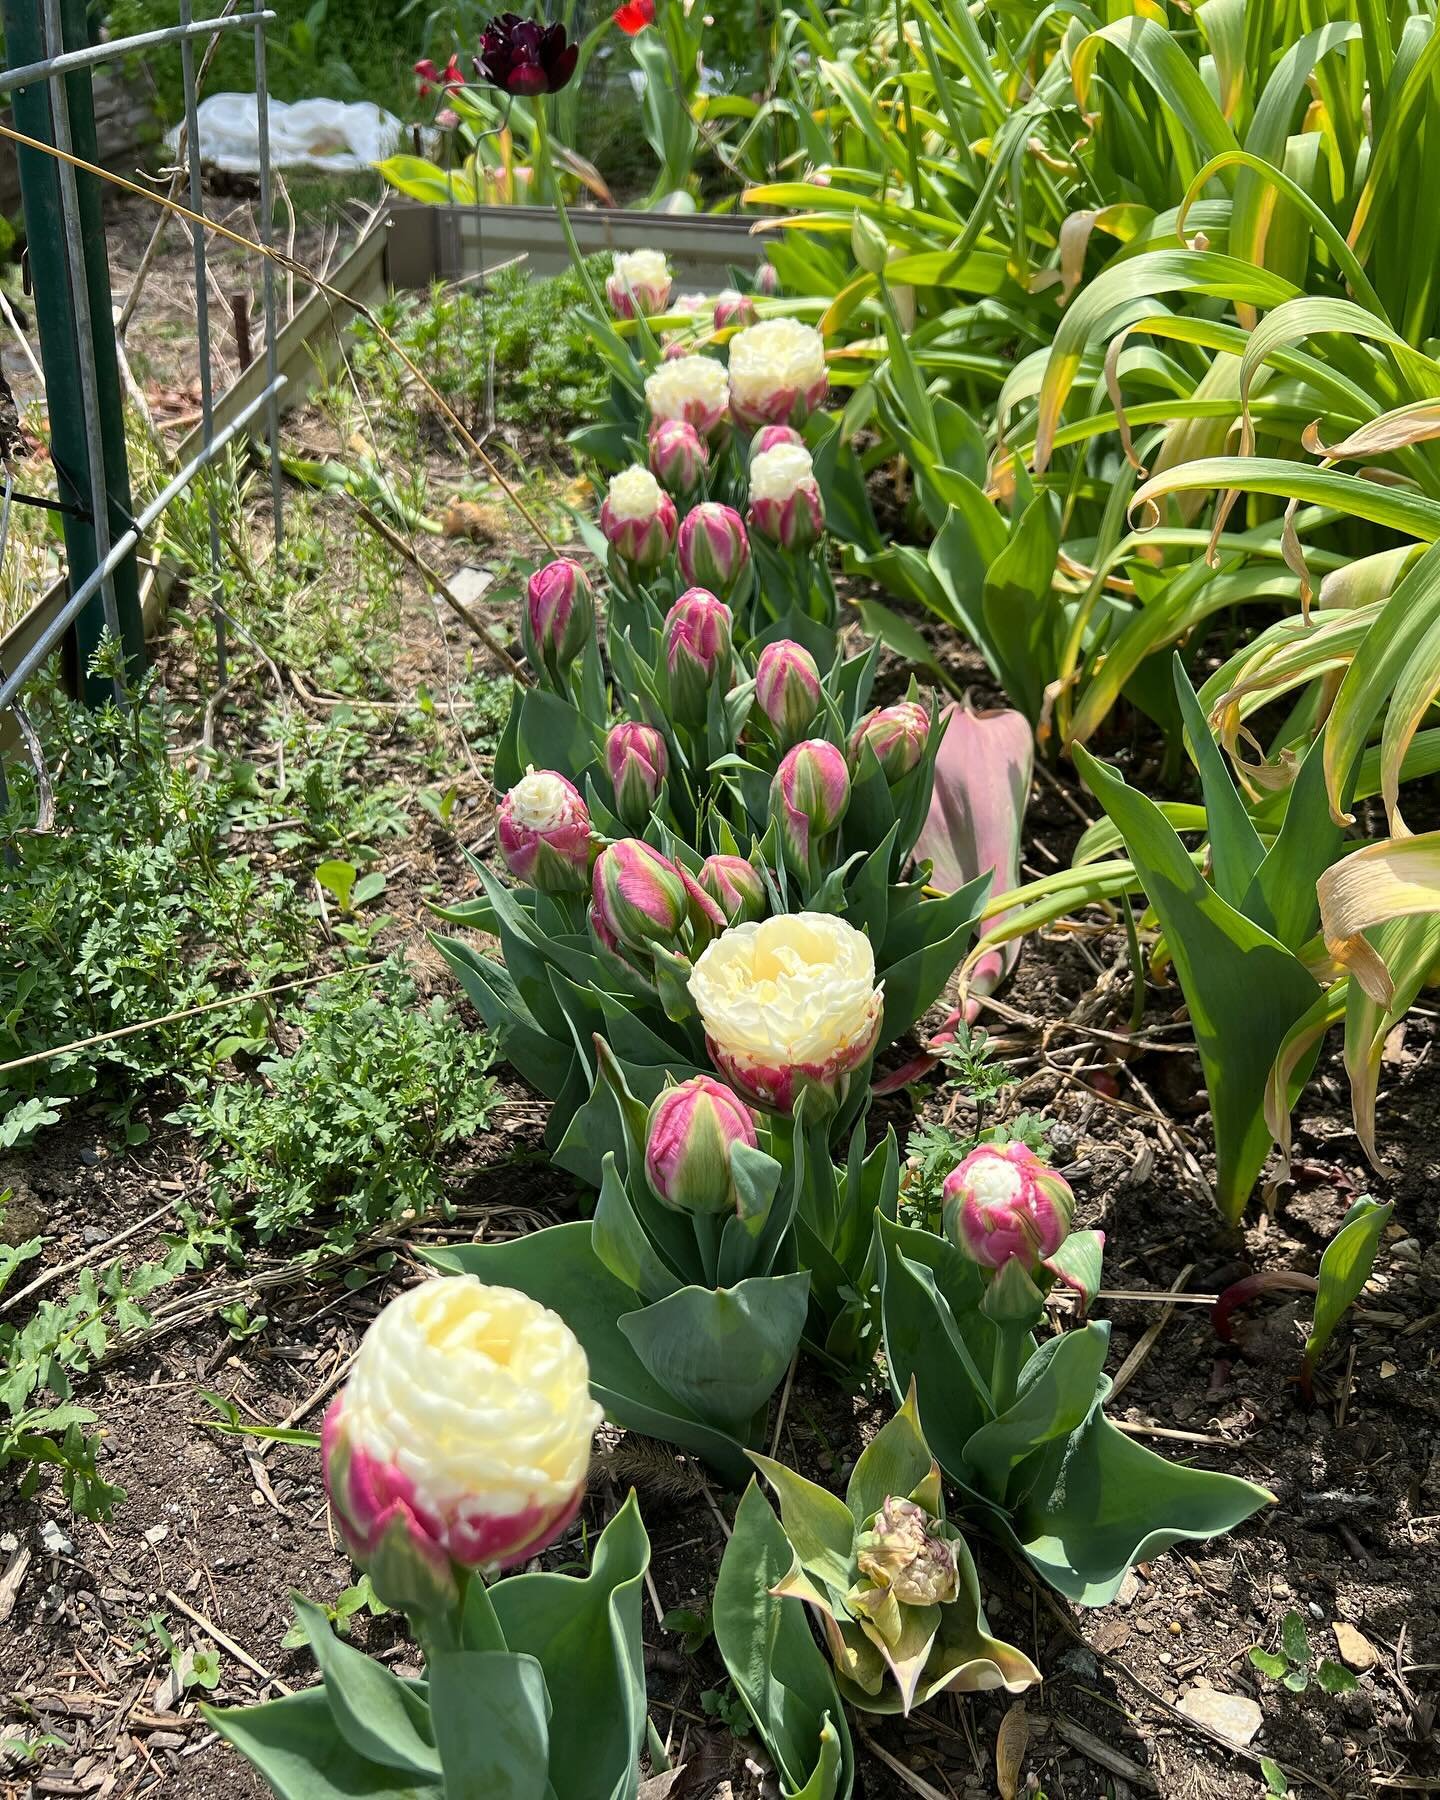 The &ldquo;ICE CREAM TULIP&rdquo;- ❤️. Only had a few today but they are coming in&mdash; only CSA orders for today at the stand.  If I have extras I will put out tomorrow!  Thank you and enjoy the weekend!